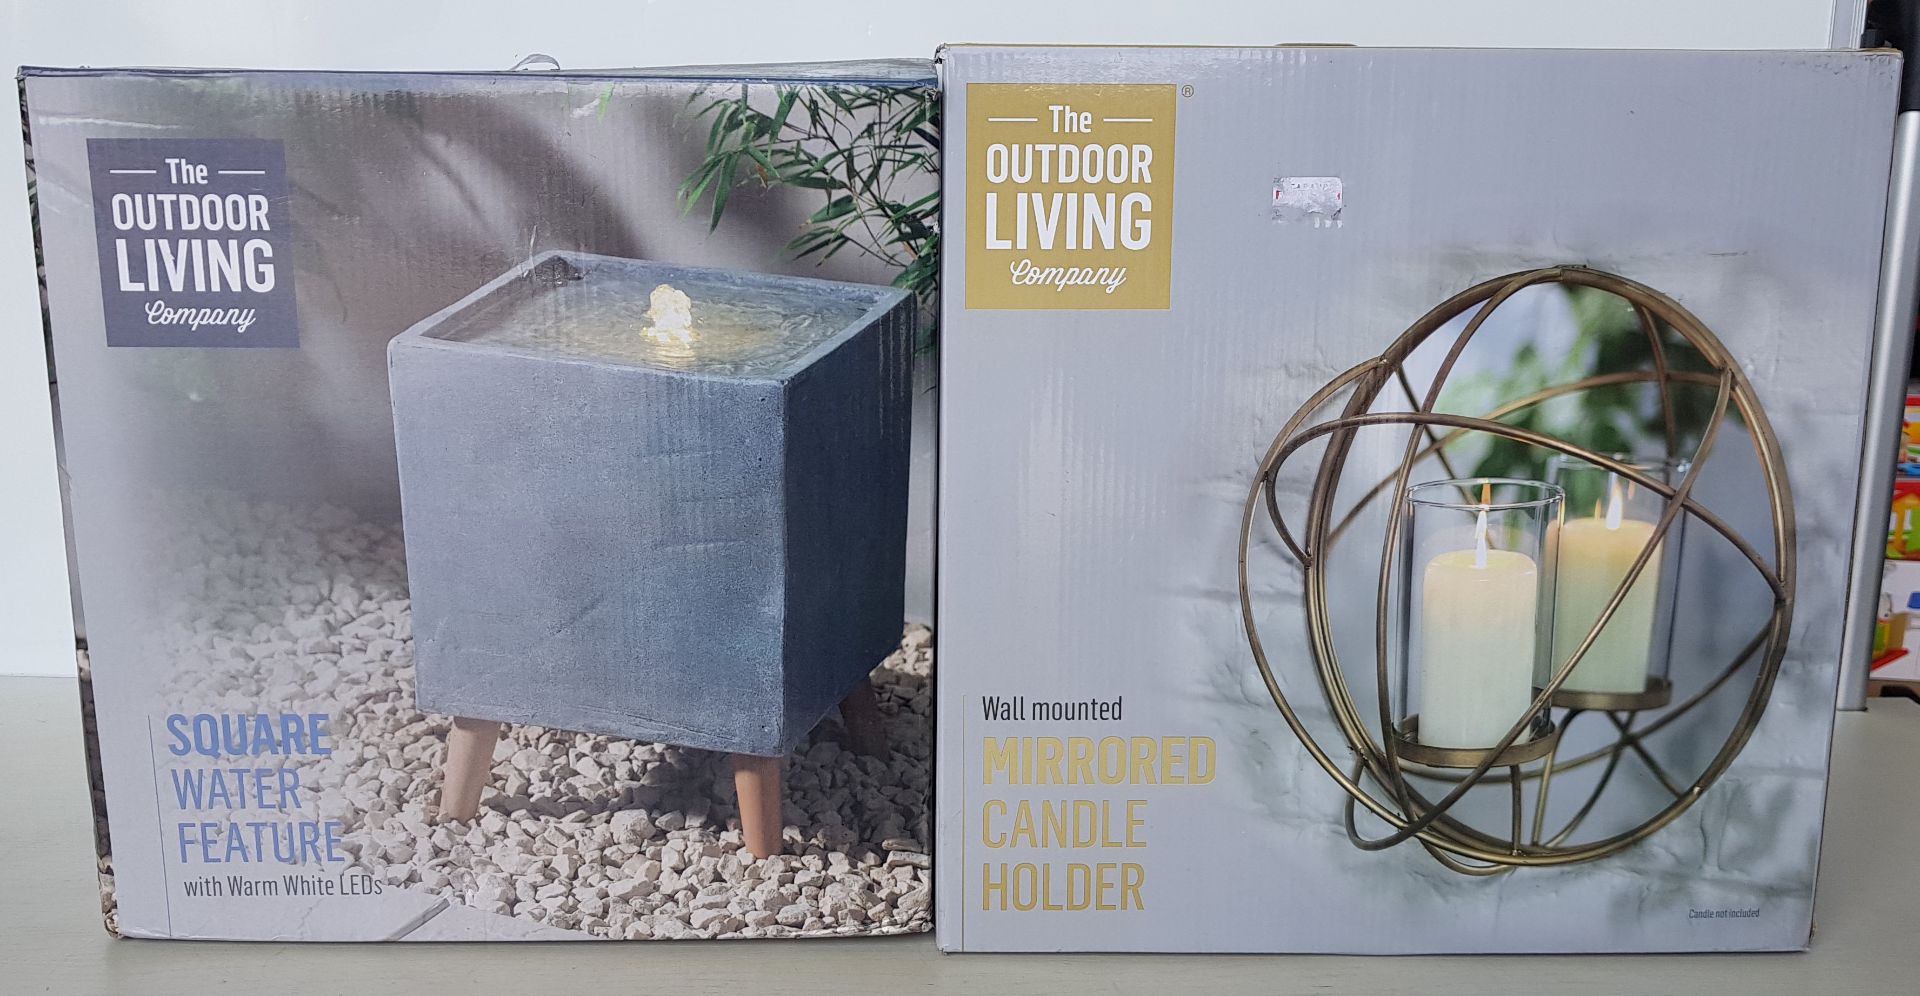 7 PIECE BRAND NEW MIXED GARDEN LOT CONTAINING 4 X THE OUTDOOR LIVING WALL MOUNTED MIRRORED CANDLE